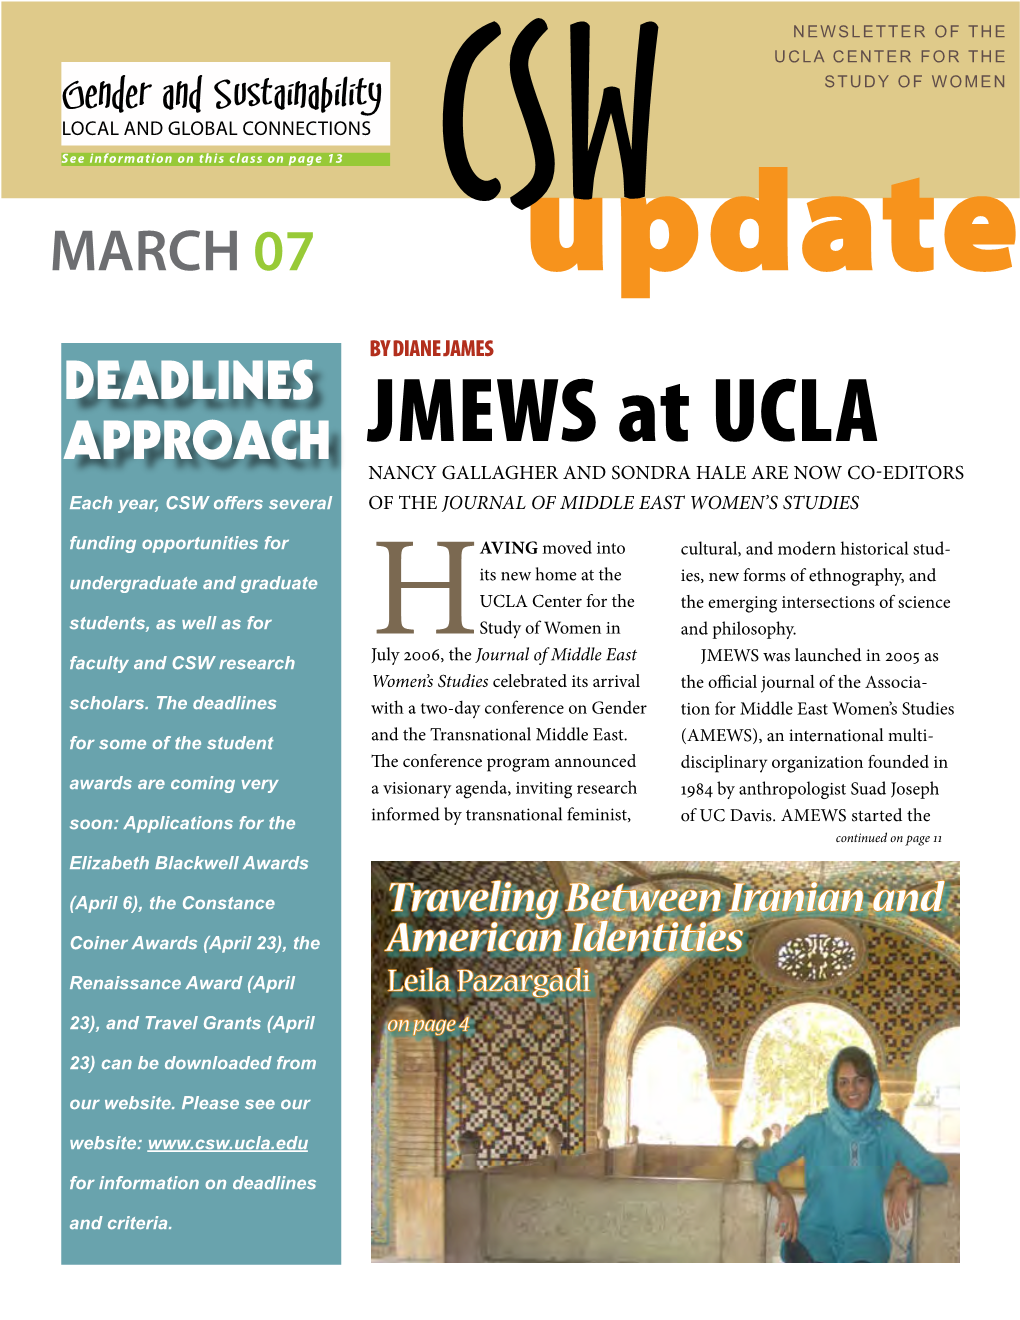 JMEWS at UCLA Nancy Gallagher and Sondra Hale ARE NOW Co-EDITORS Each Year, CSW Offers Several of the JOURNAL of MIDDLE East WOMEN’S STUDIES